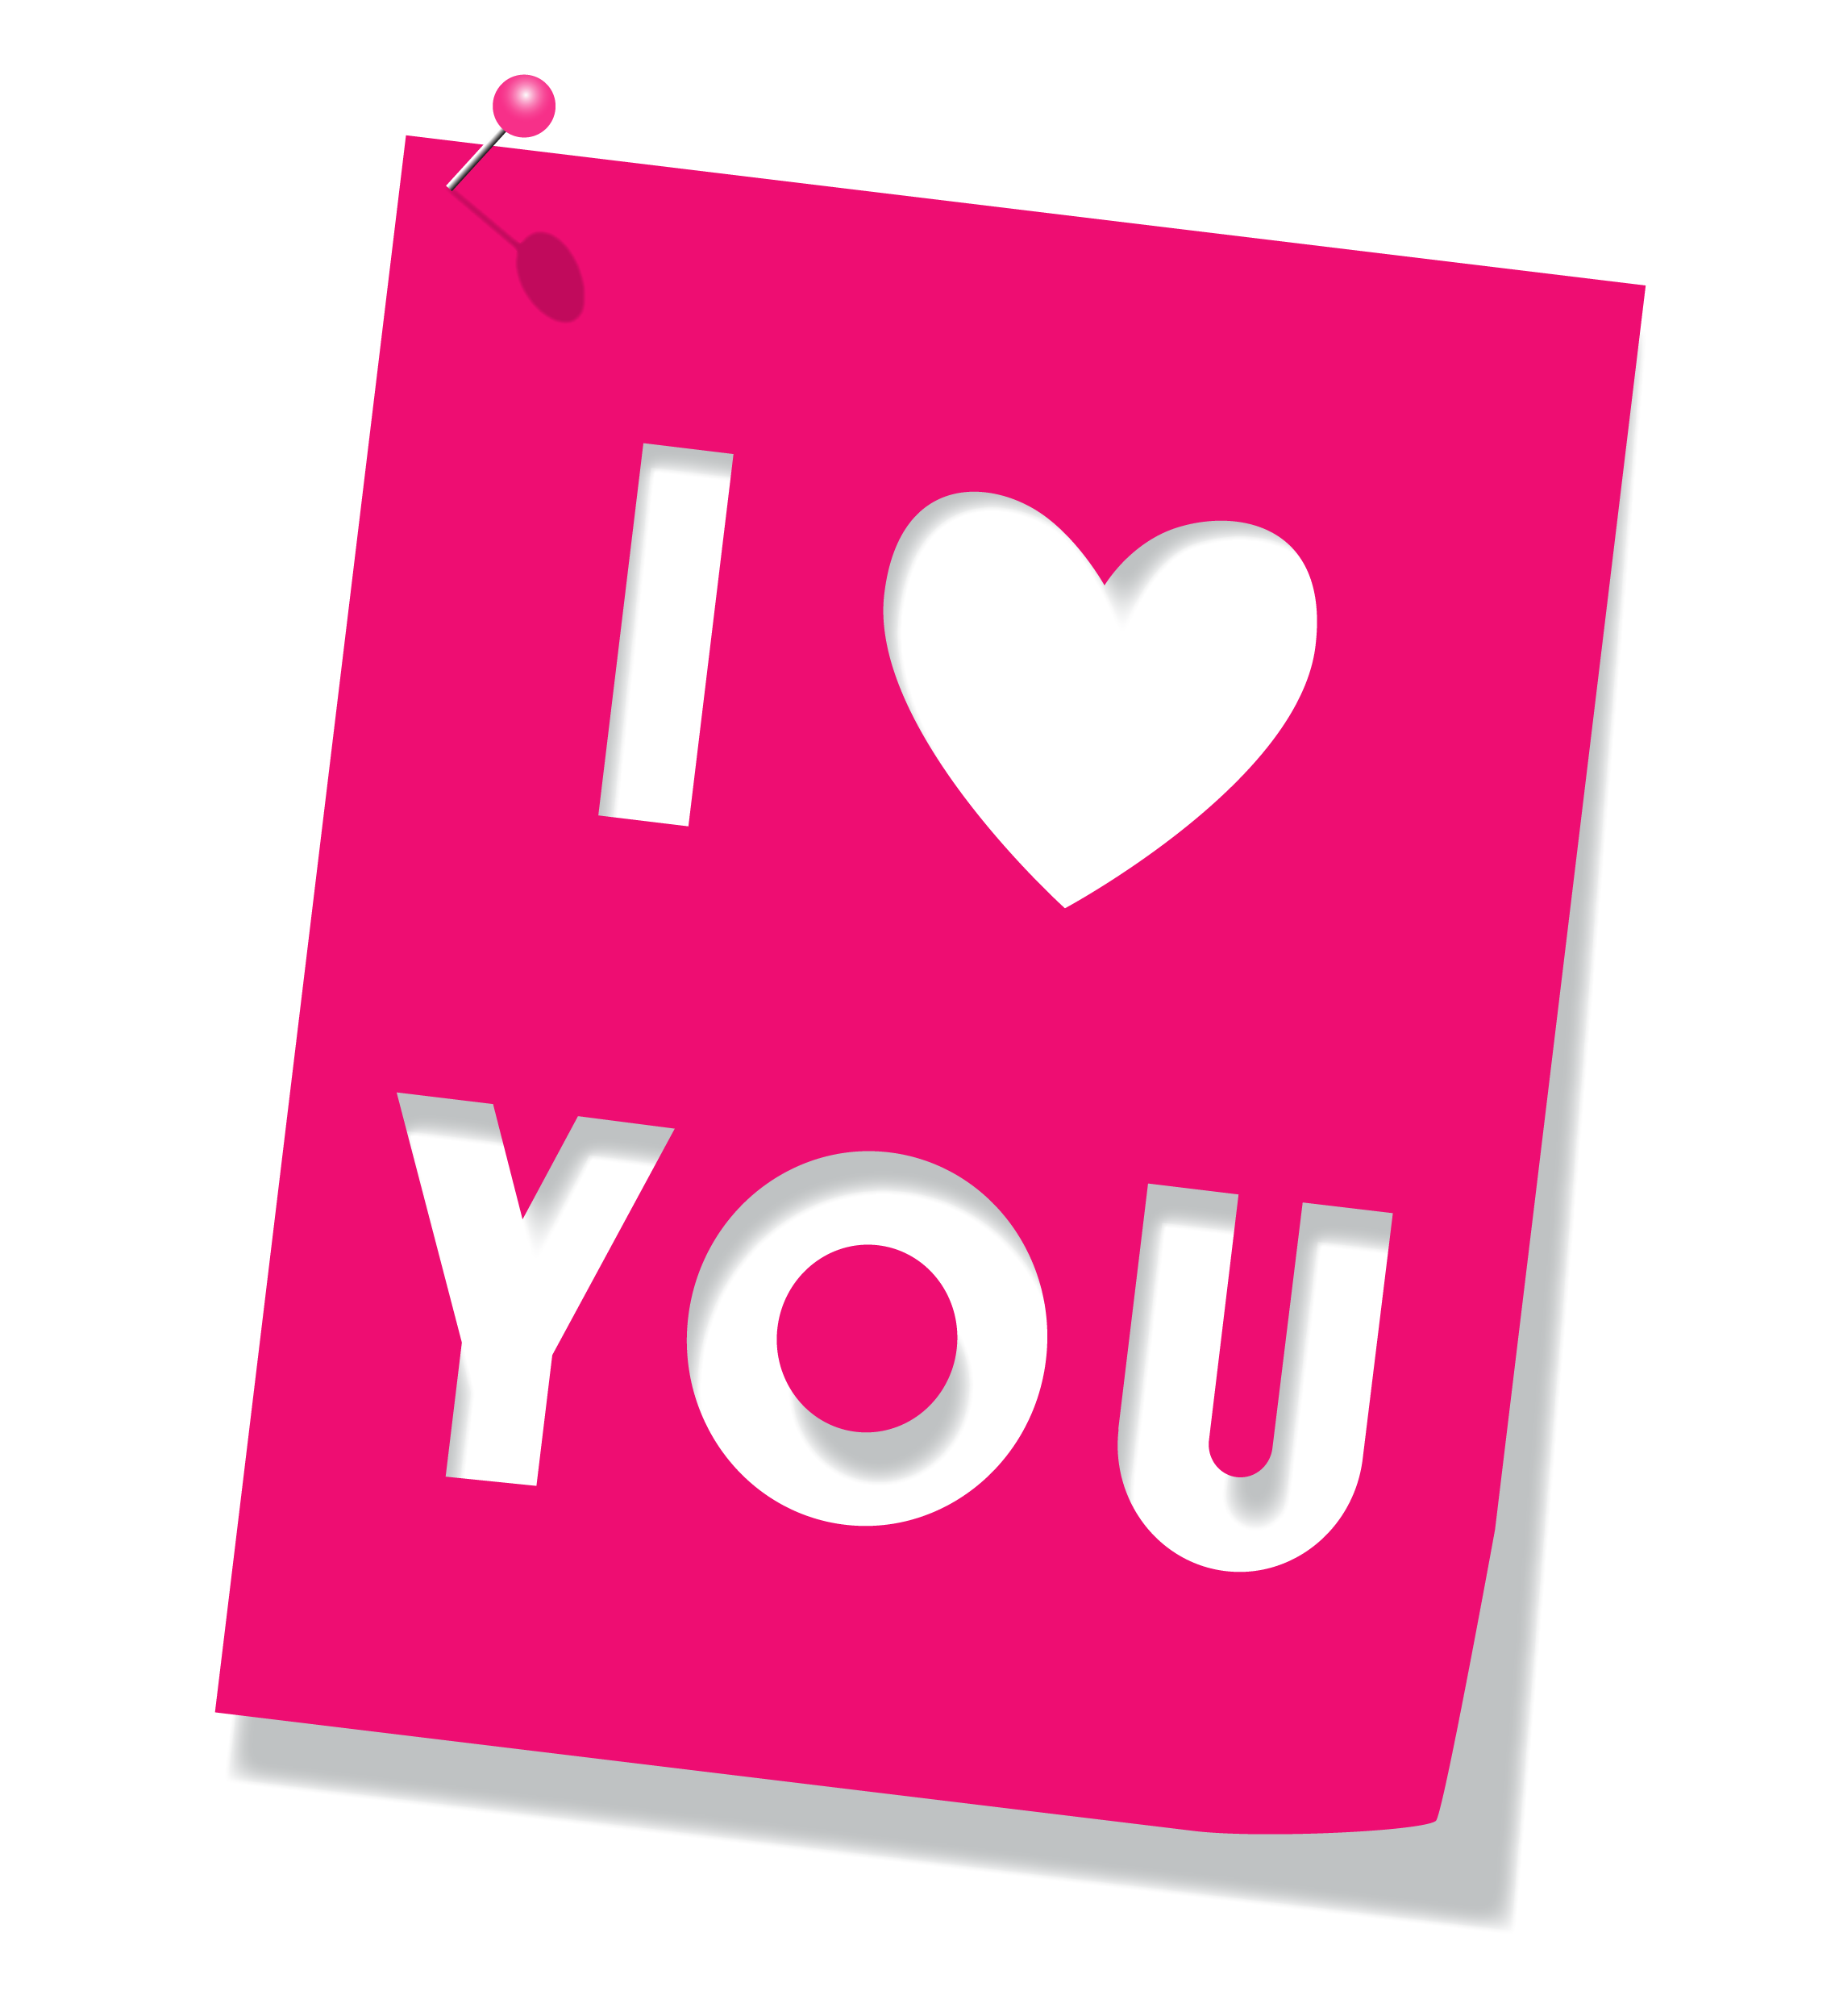 love clipart pink